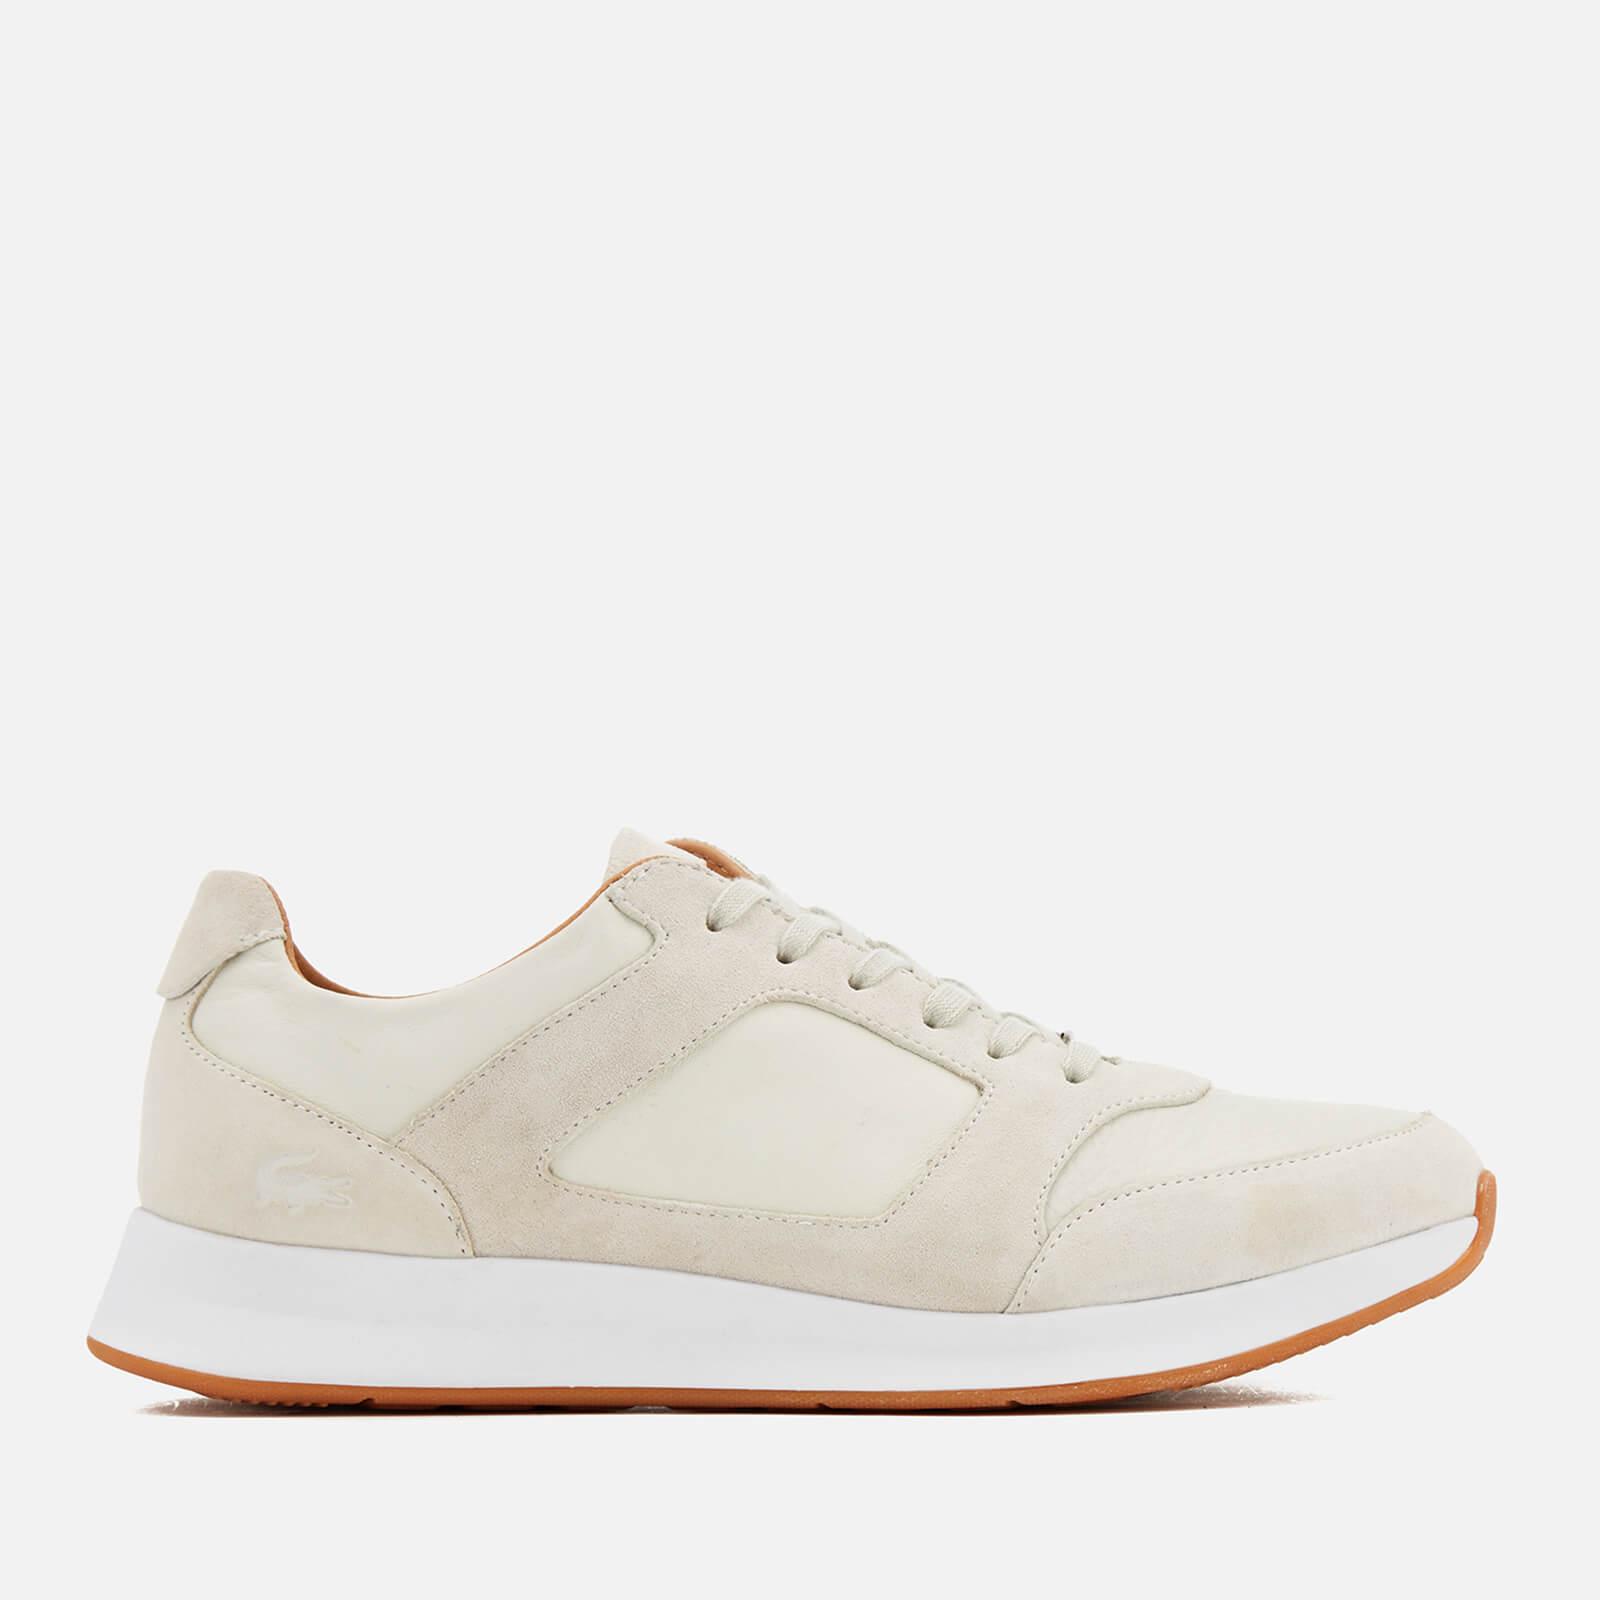 Lacoste Leather Joggeur 116 Trainers in 